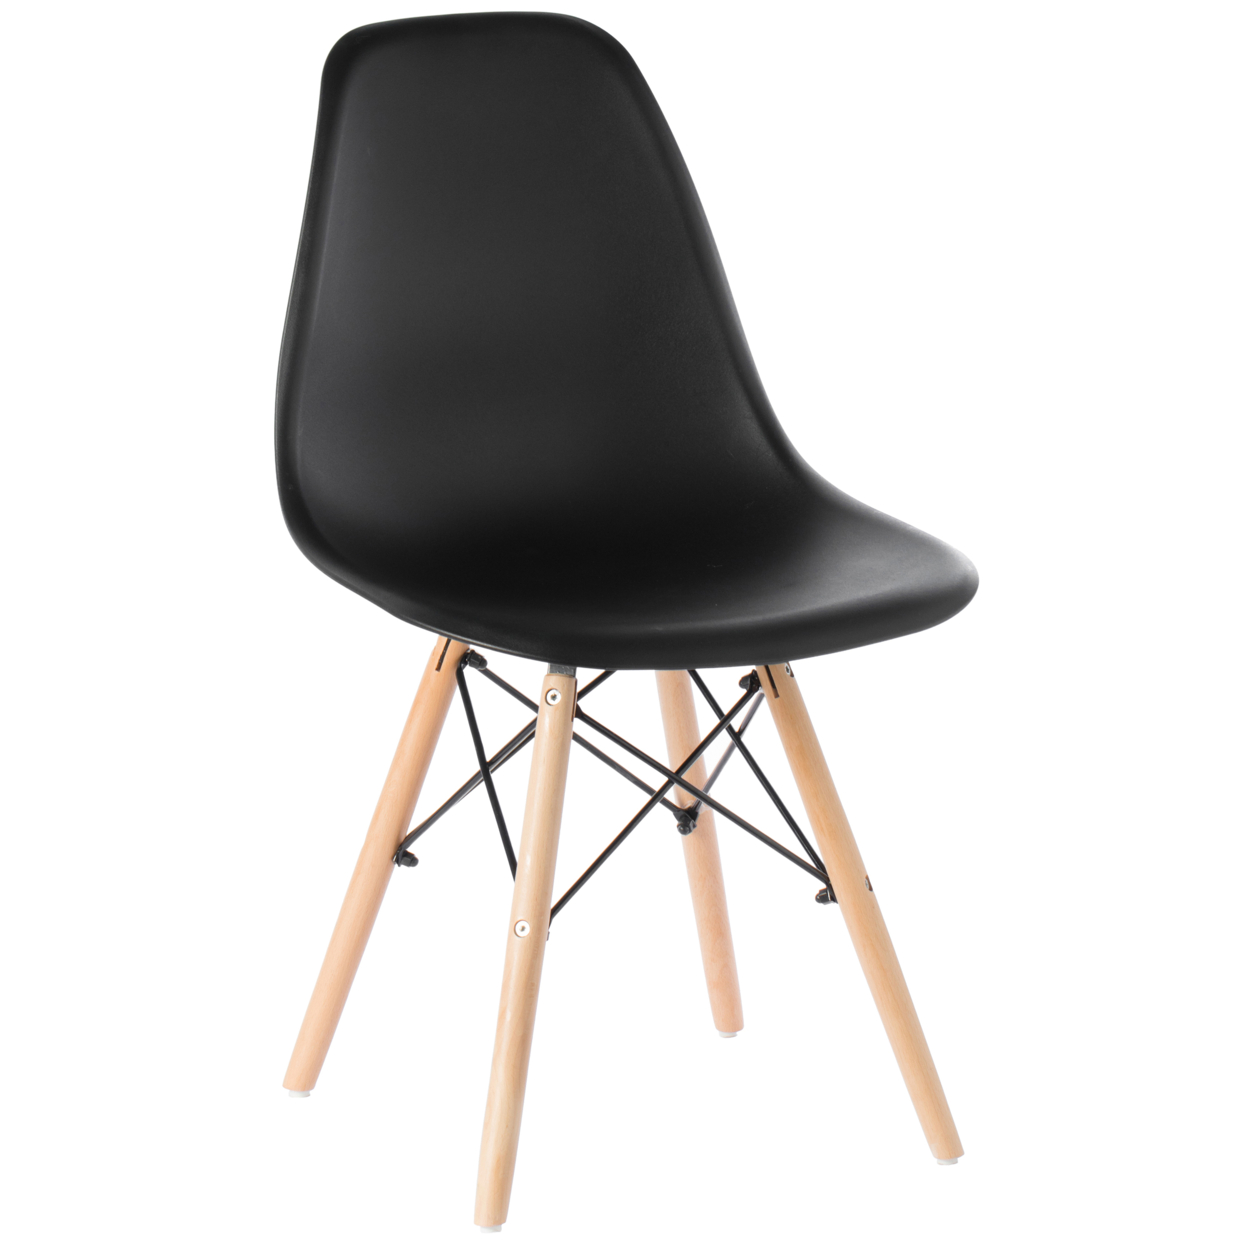 Mid-Century Modern Style Plastic DSW Shell Dining Chair With Solid Beech Wooden Dowel Eiffel Legs - Gray